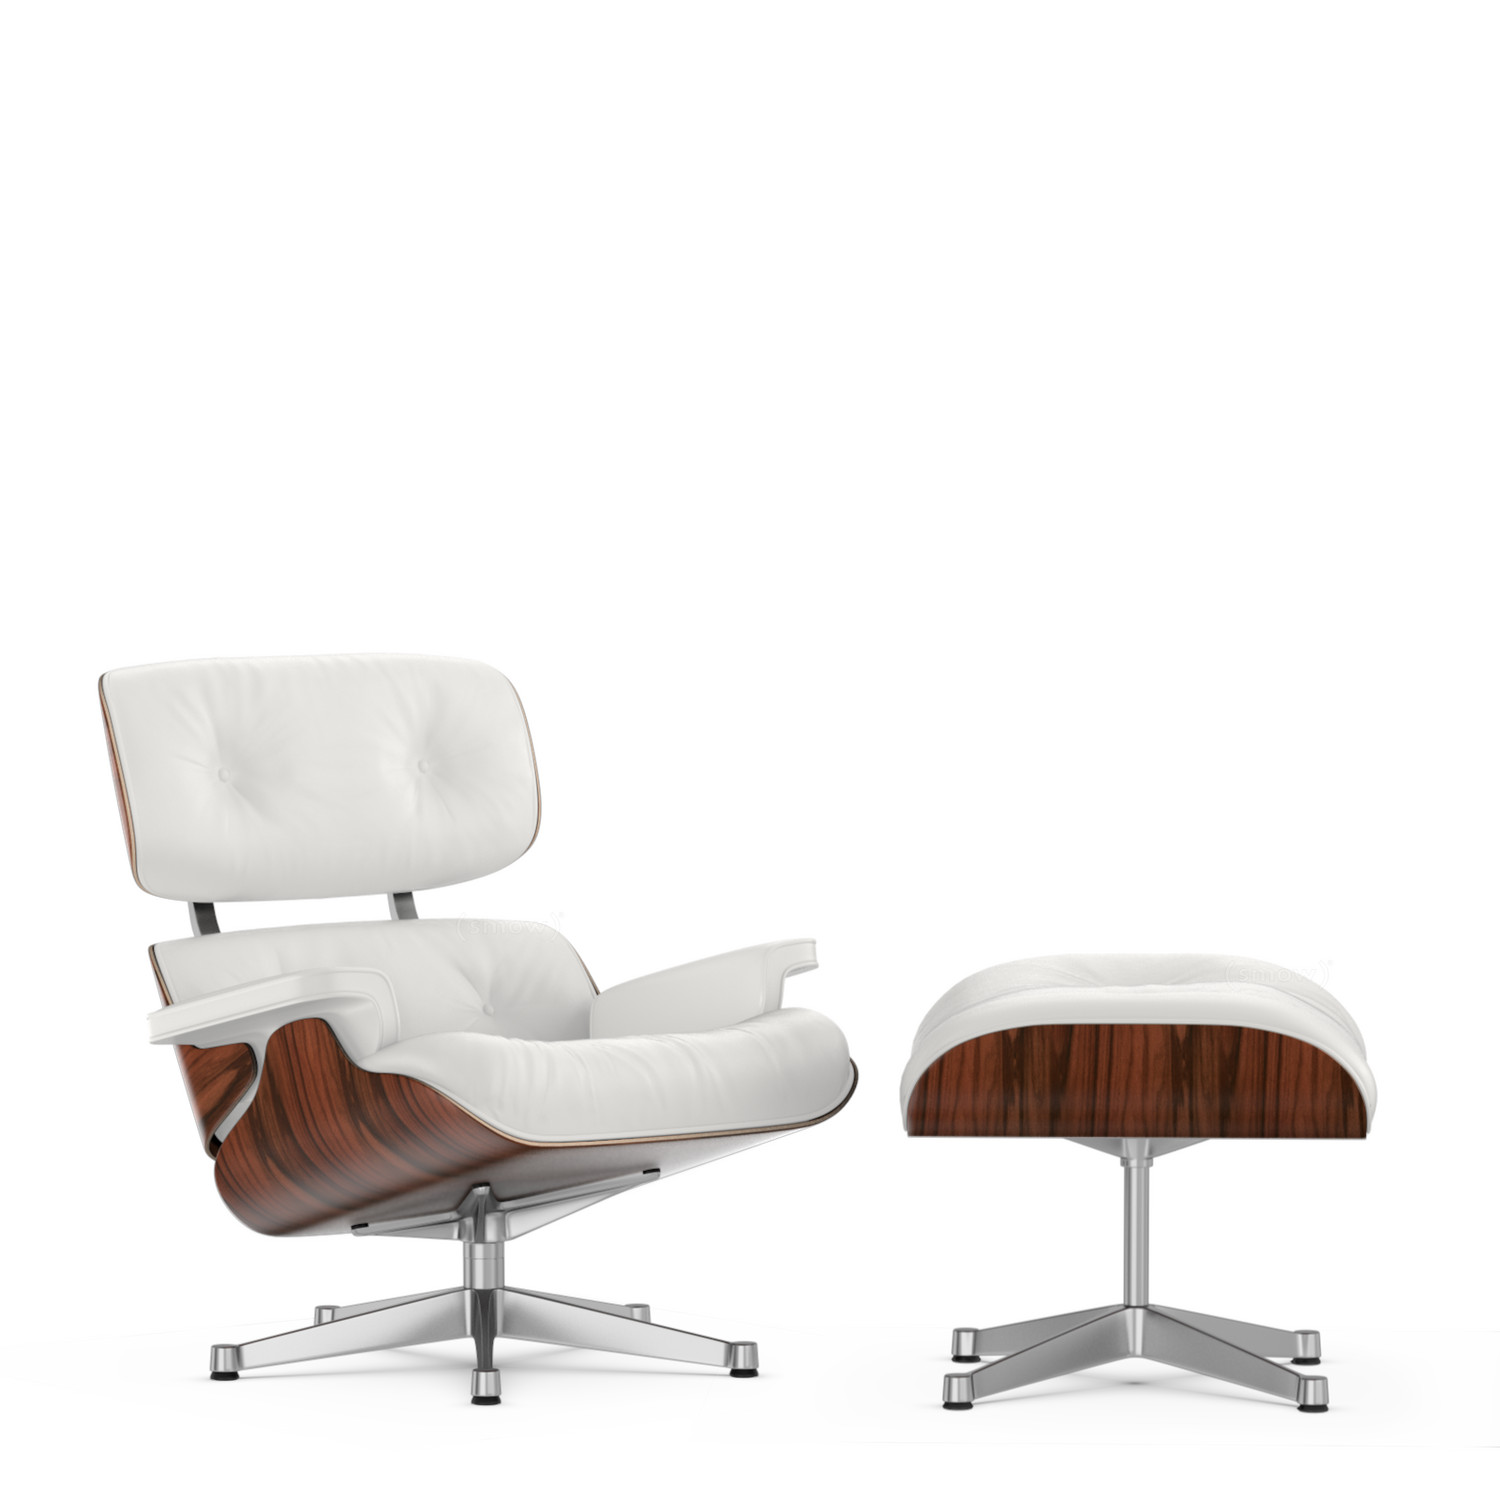 Vitra Lounge Chair & Ottoman, Santos Leather Premium F cm, Aluminium polished by Charles & Ray 1956 - Designer furniture by smow.com